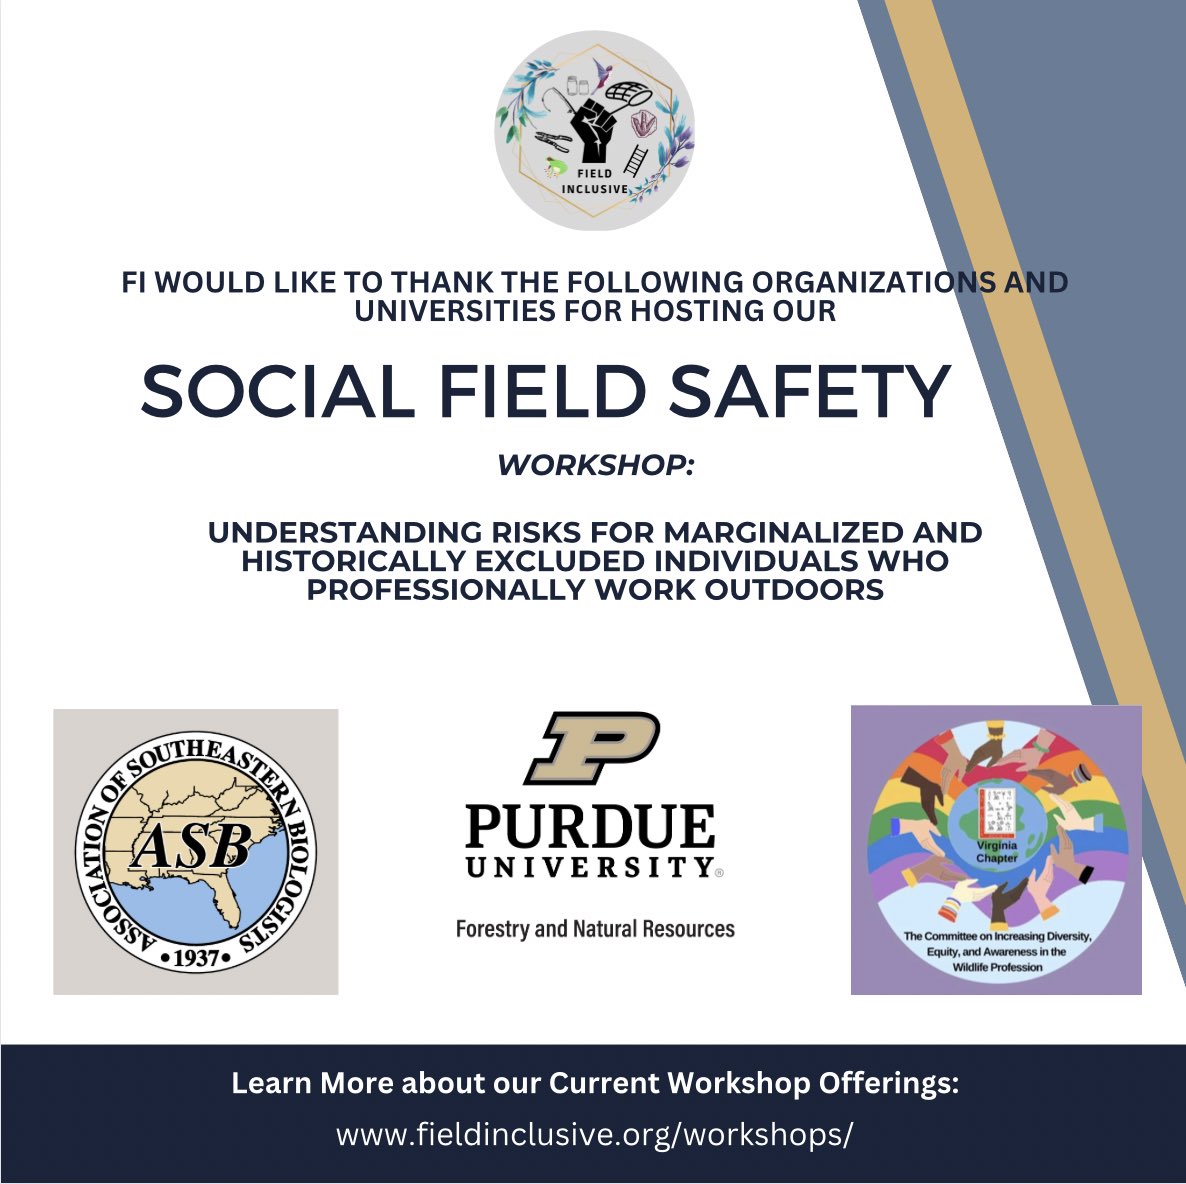 We have been busy this week (yes already) and last week with offering and hosting our social field safety workshop. We want to take the time to recognize and thank the following organizations and universities who have committed to more safe and inclusive outdoor experiences by…